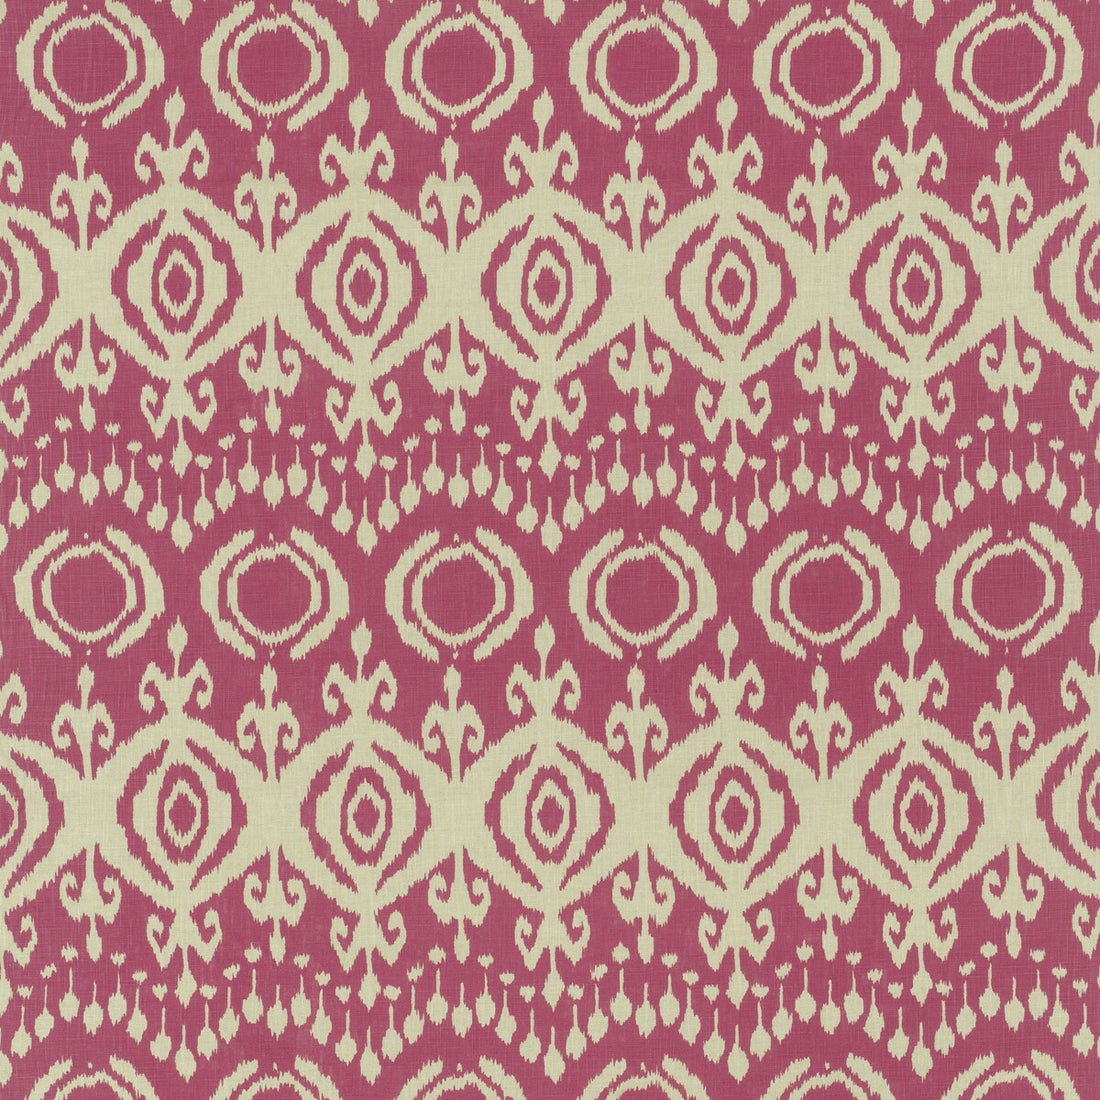 Volcano fabric in paradise color - pattern AM100290.7.0 - by Kravet Couture in the Andrew Martin Expedition collection